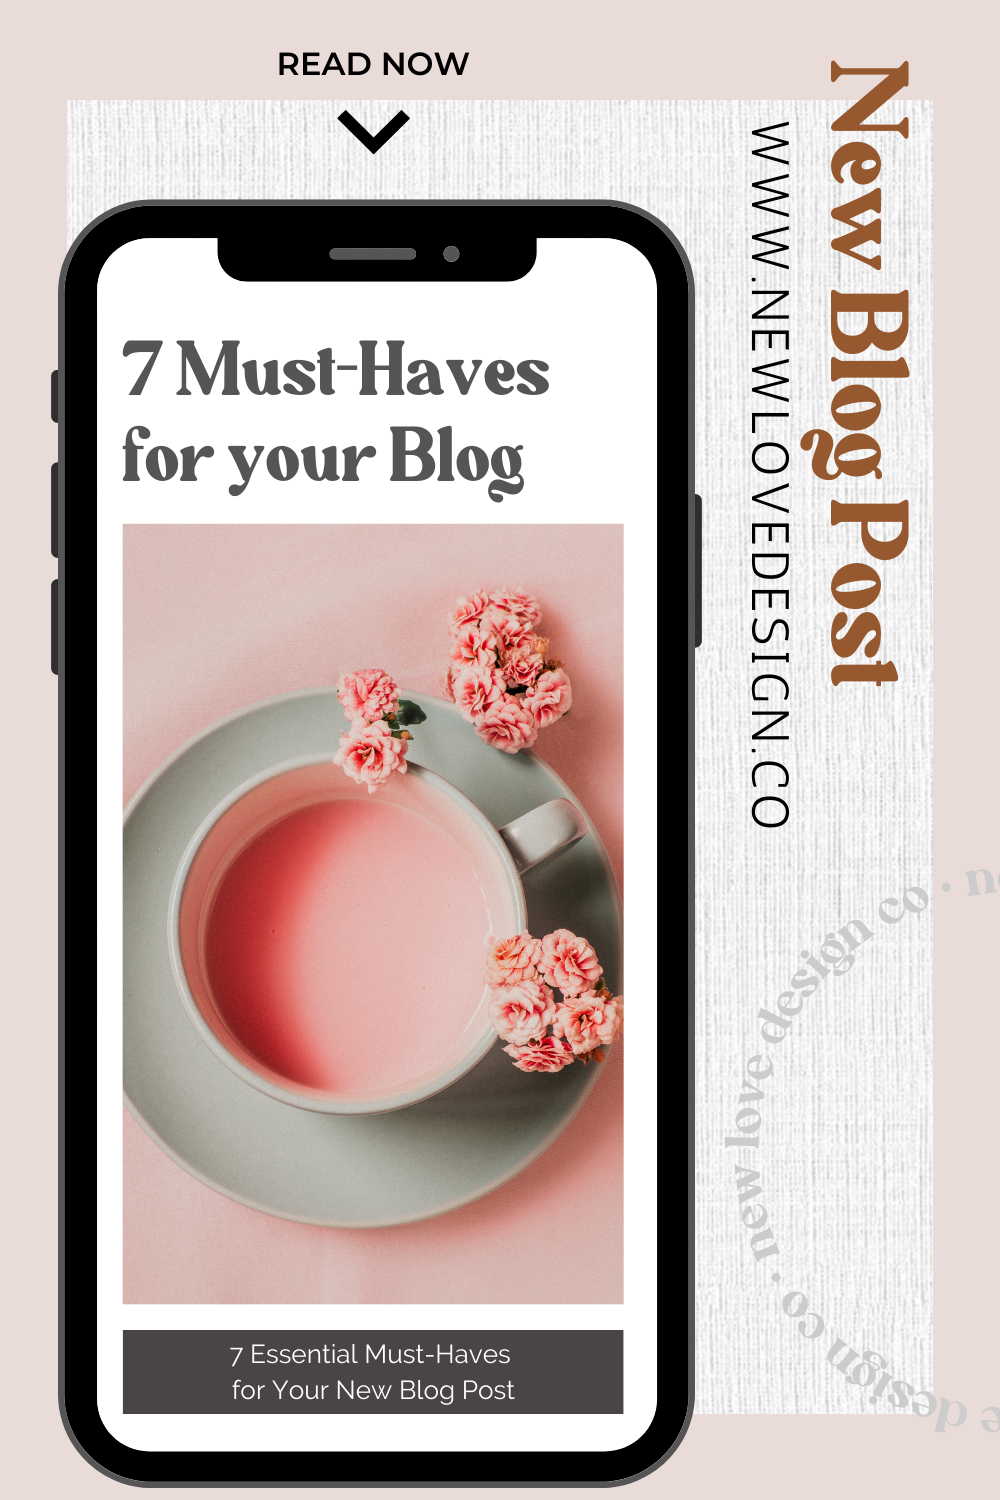 7 Must-Haves for your New Blog Post